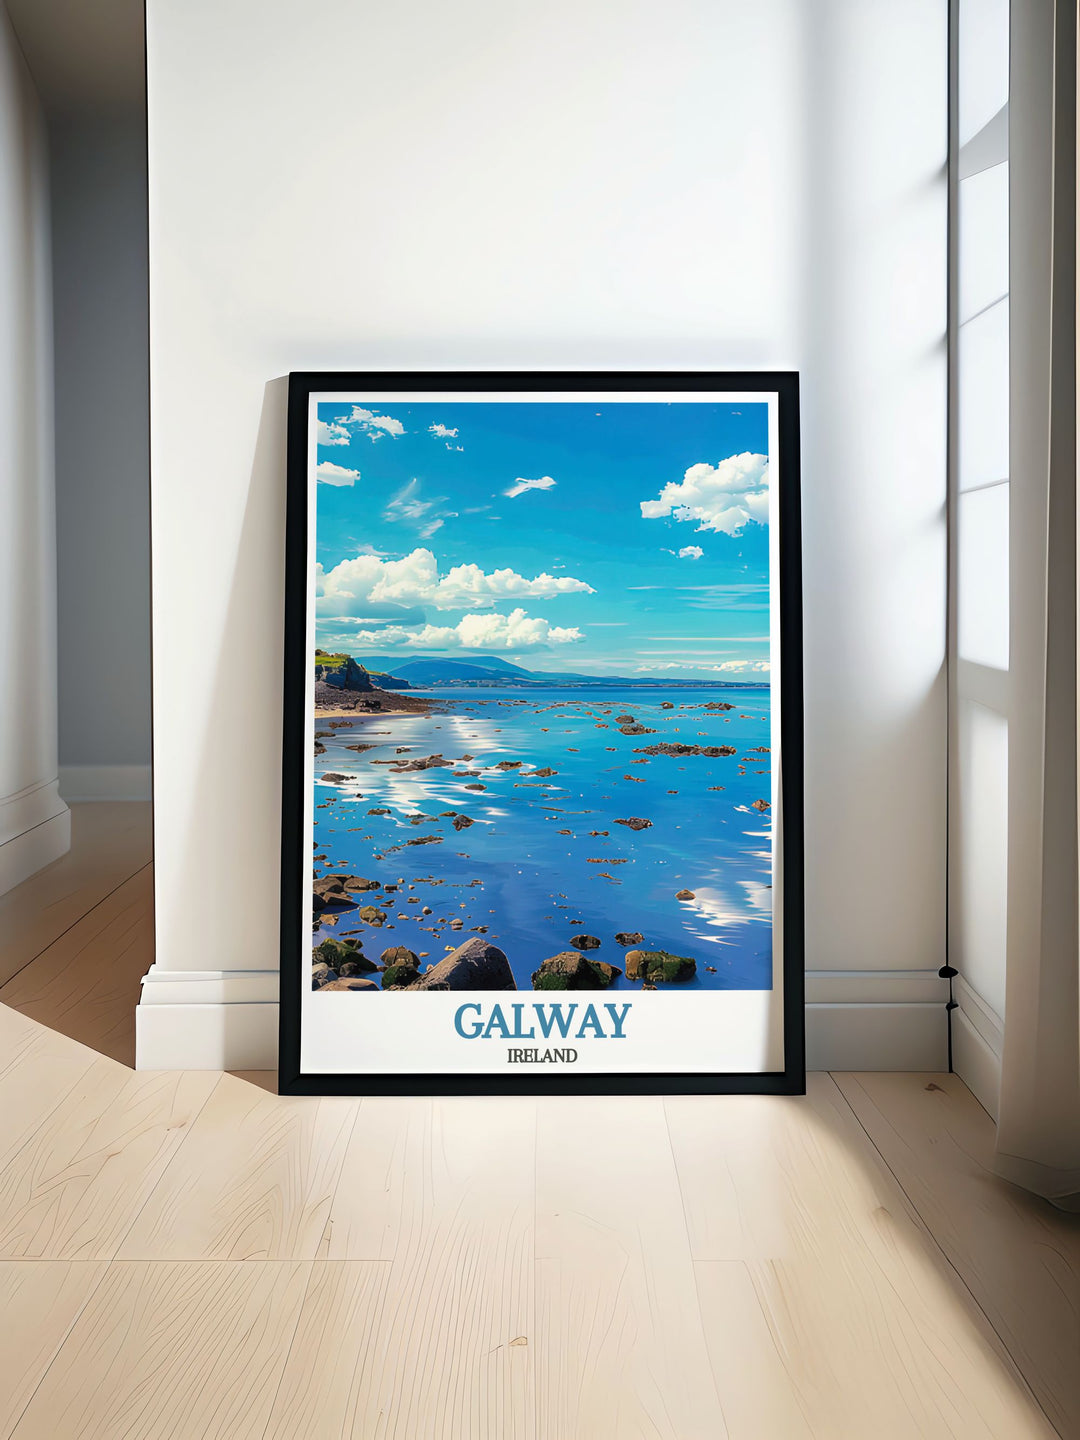 Bring the enchanting scenery of Galway and Galway Bay into your living space with this beautifully crafted poster. The artwork highlights the historical and natural landmarks of the region, making it a perfect gift for travelers and art lovers alike.